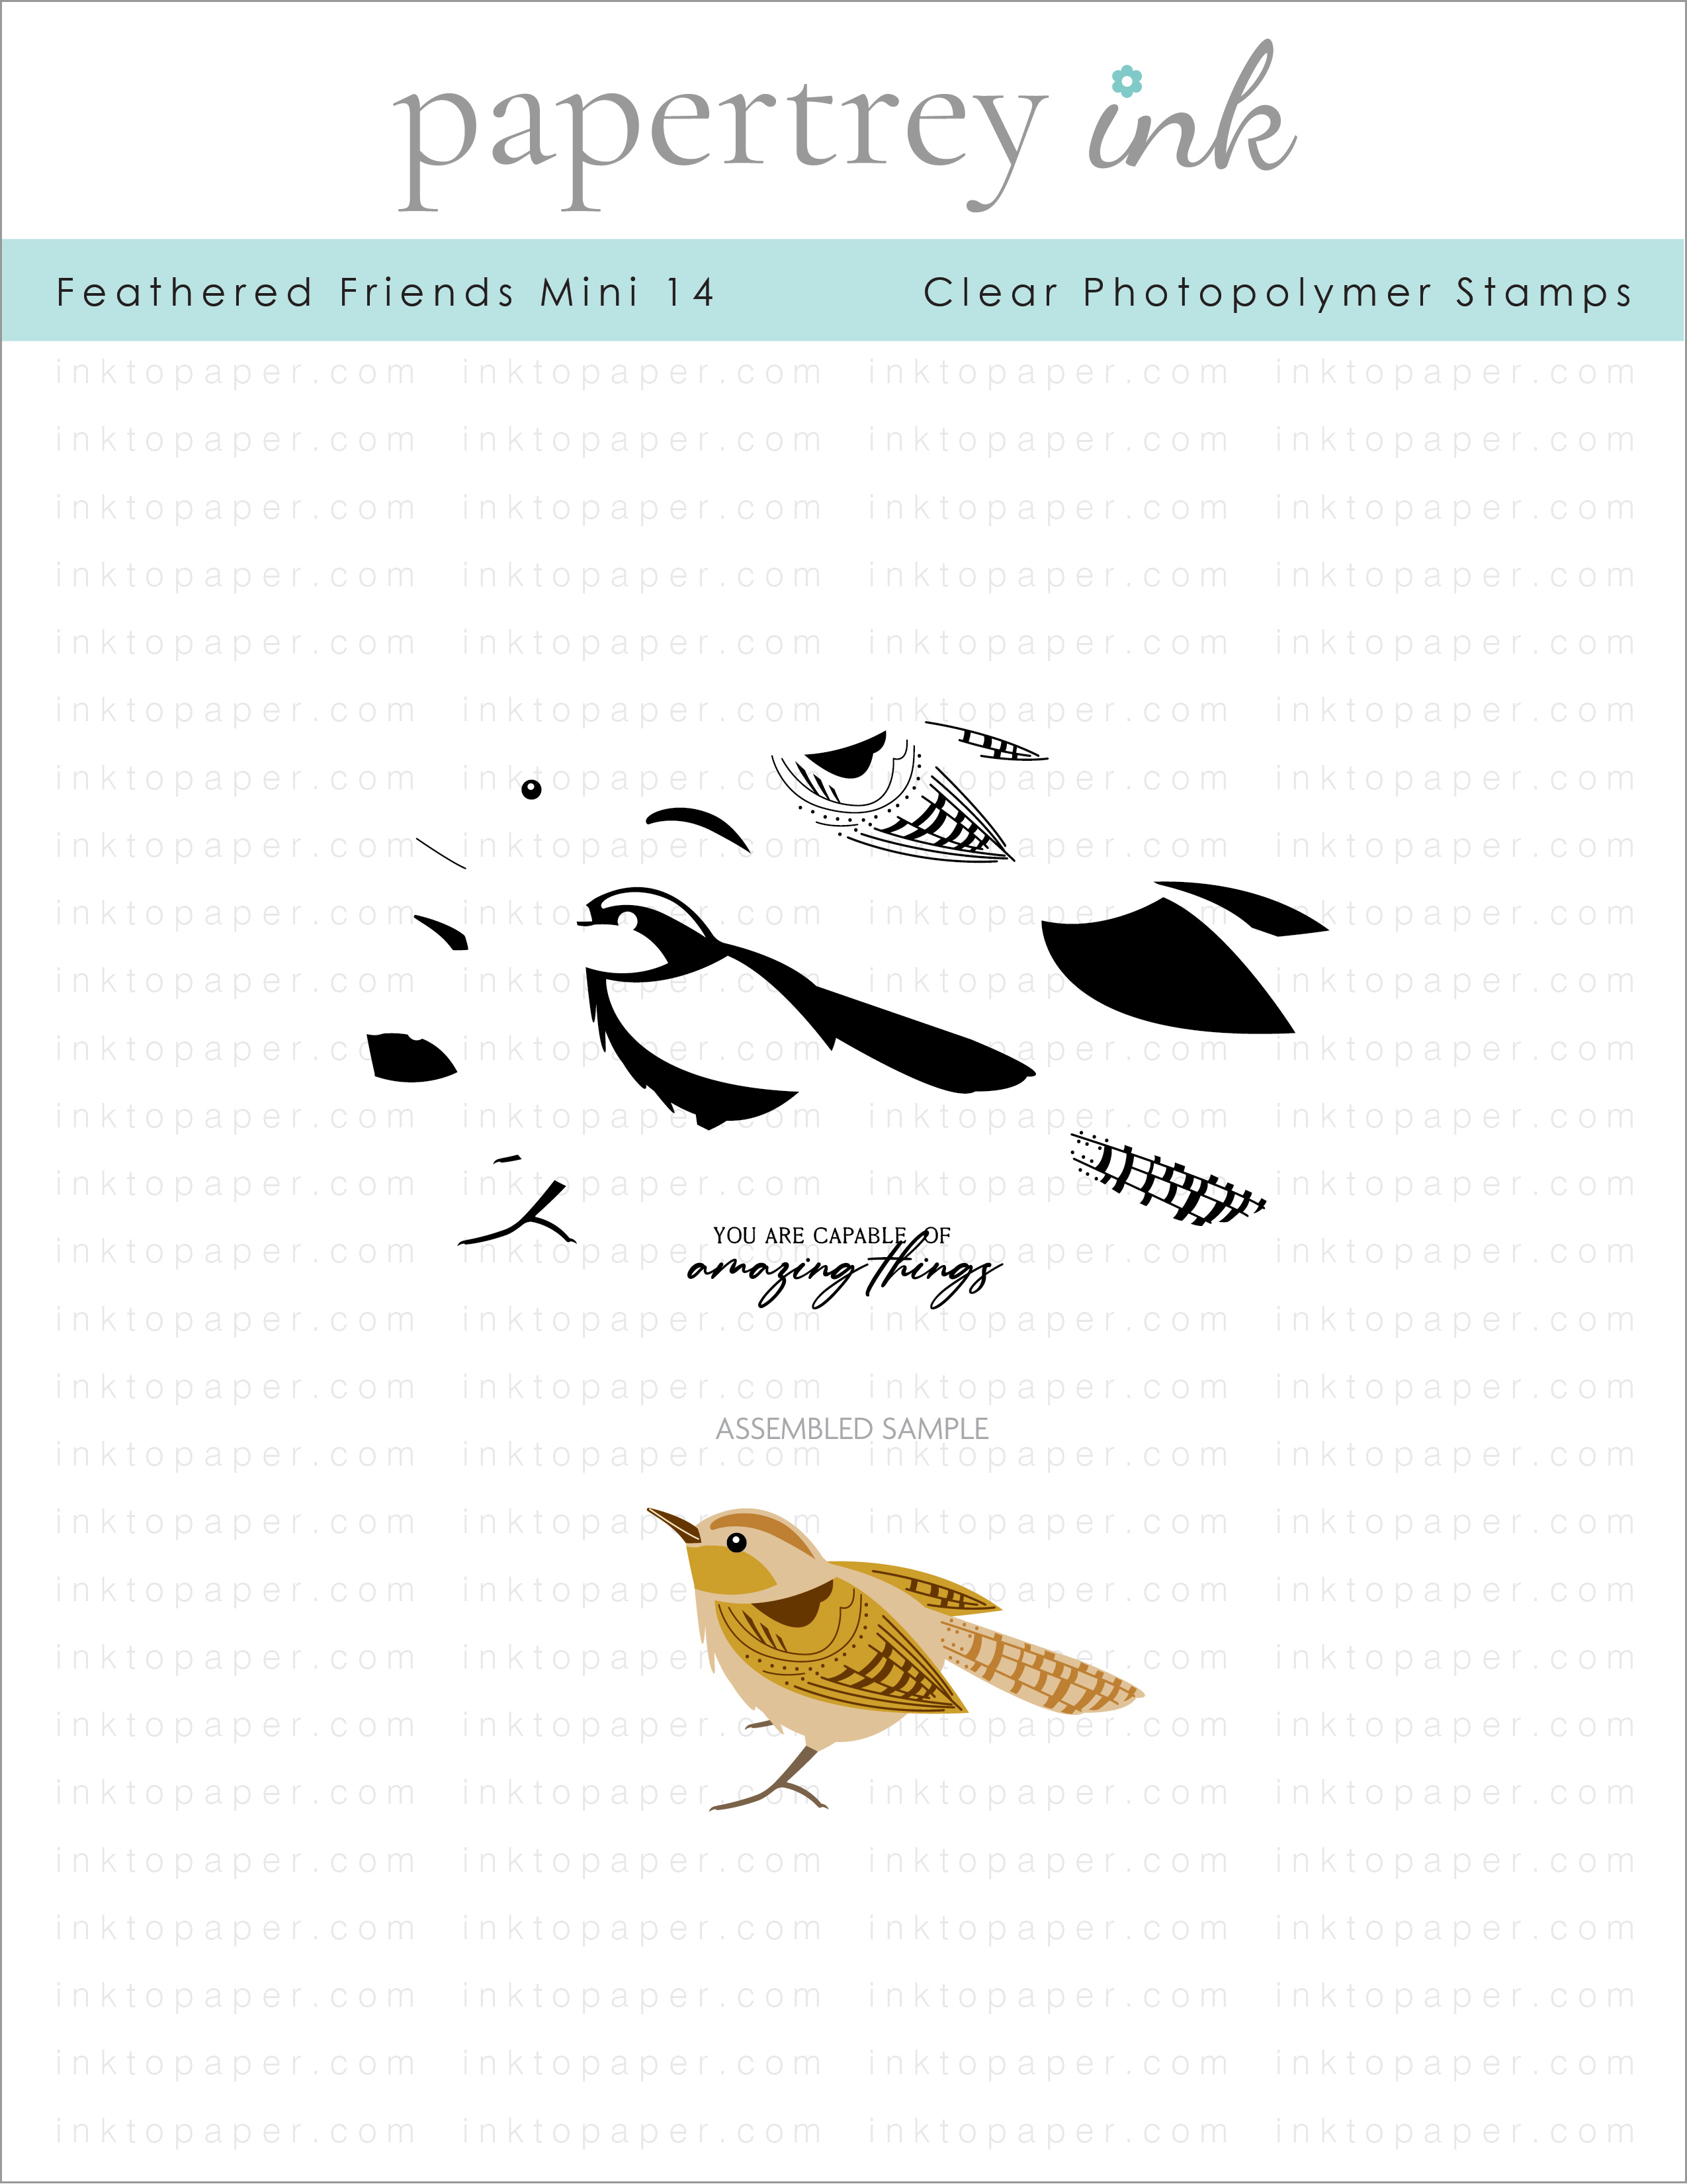 Feathered Friends Mini 14 Mini Stamp Set: Papertrey Ink